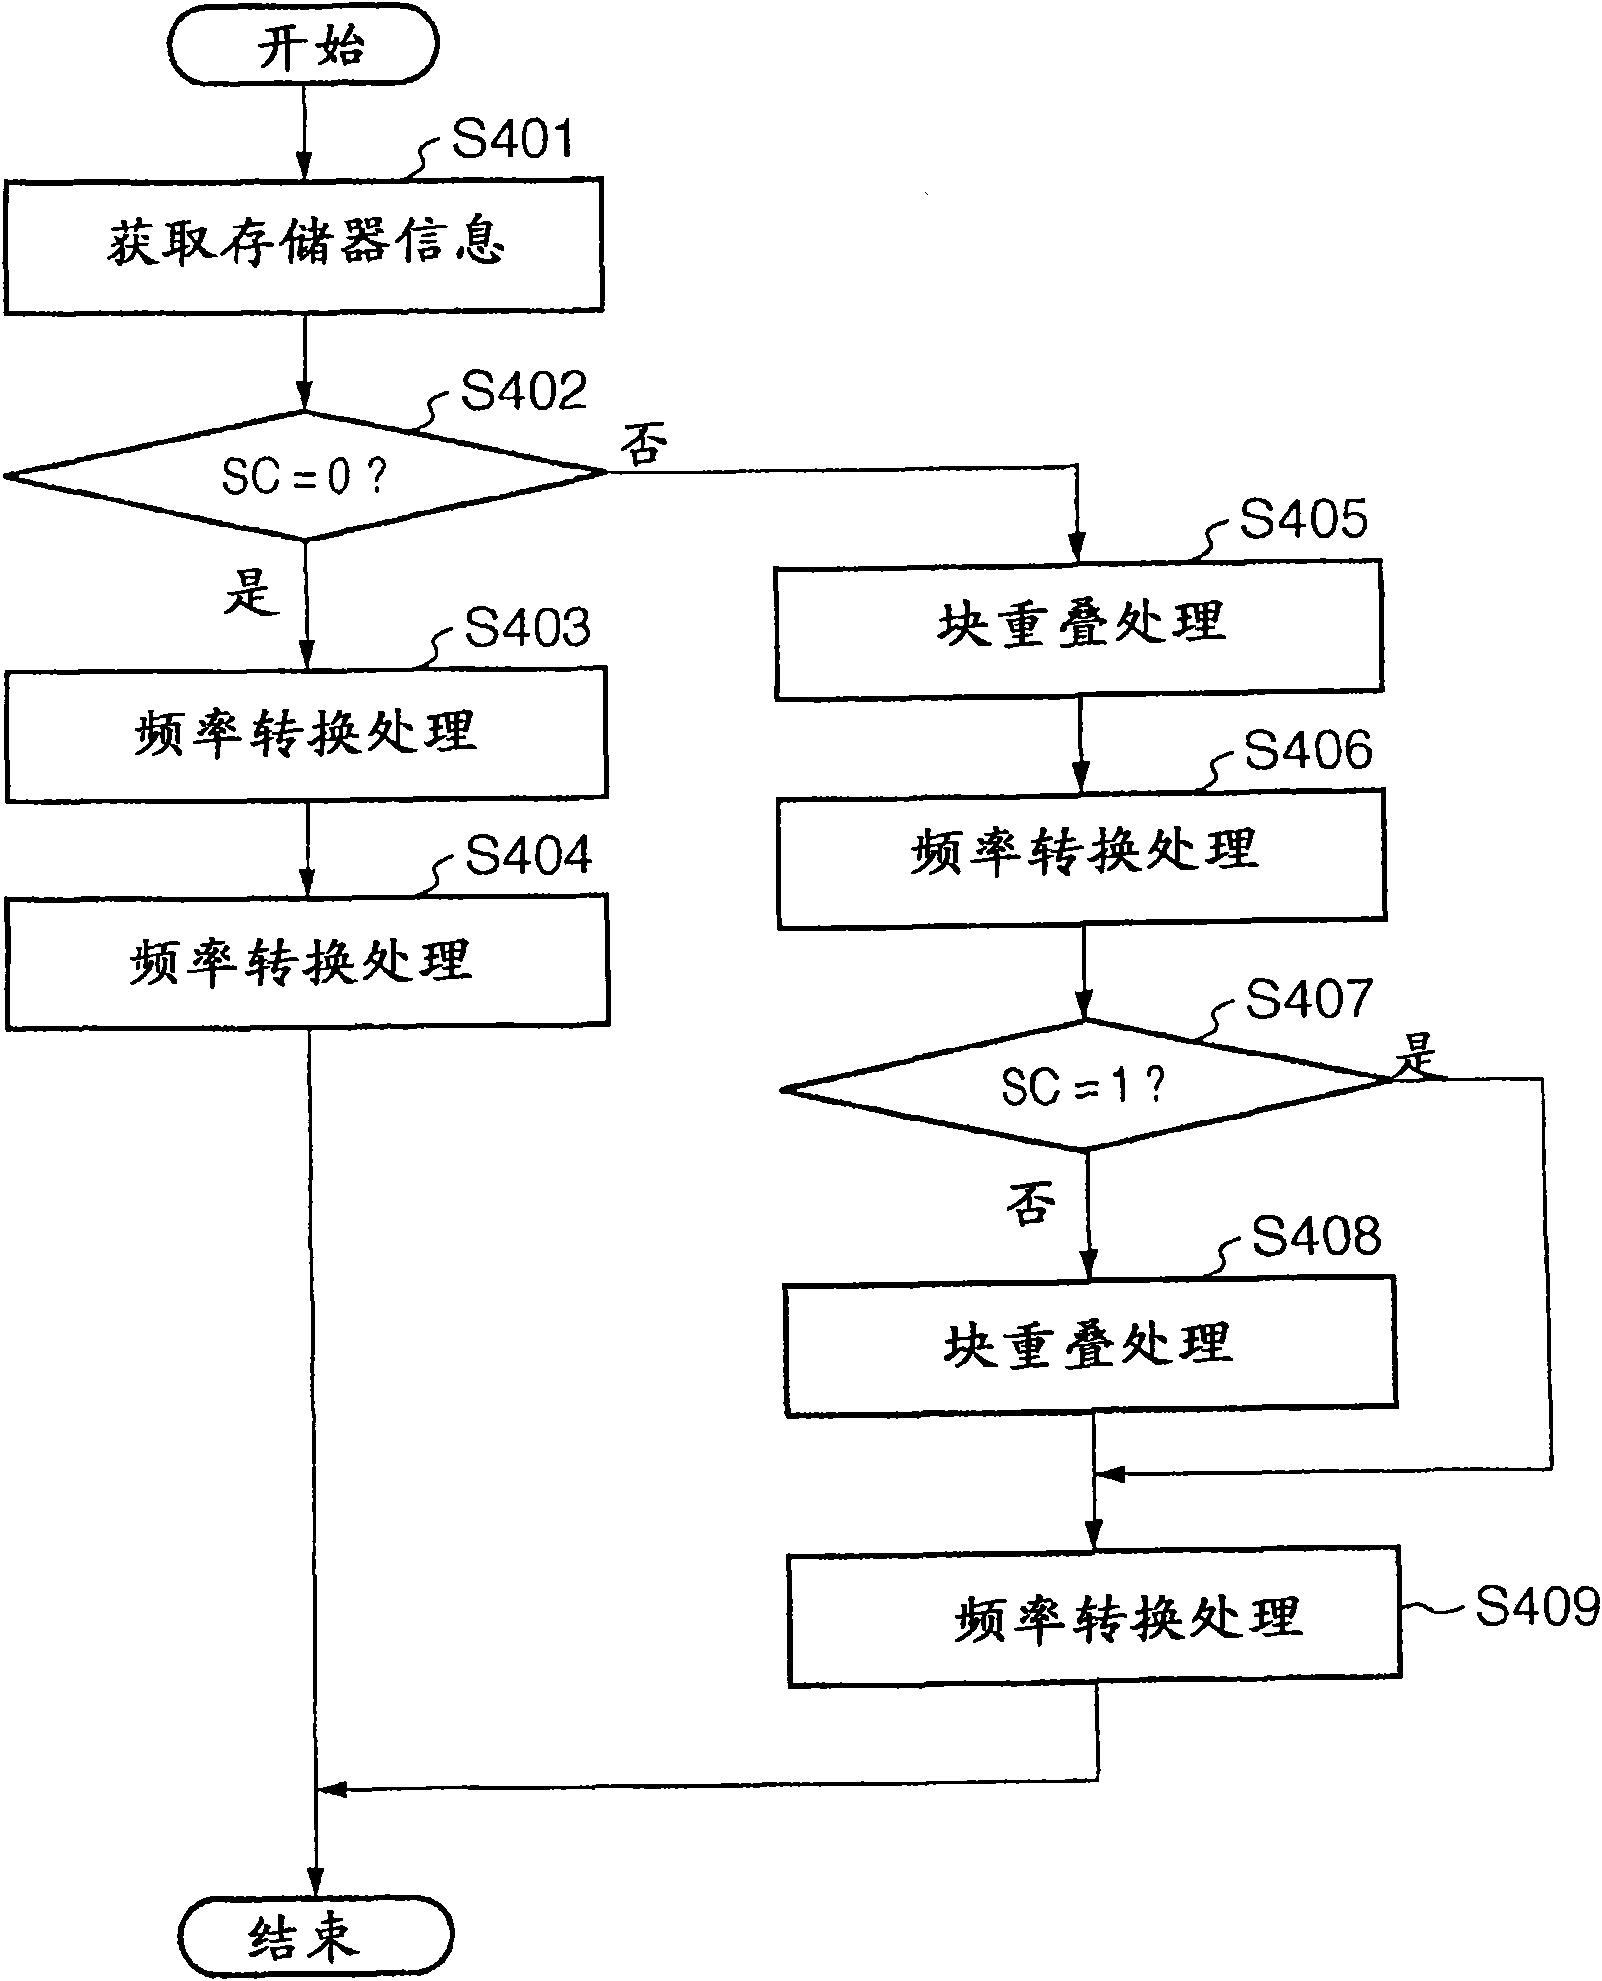 Image encoding apparatus, image decoding apparatus, and methods of controlling the same